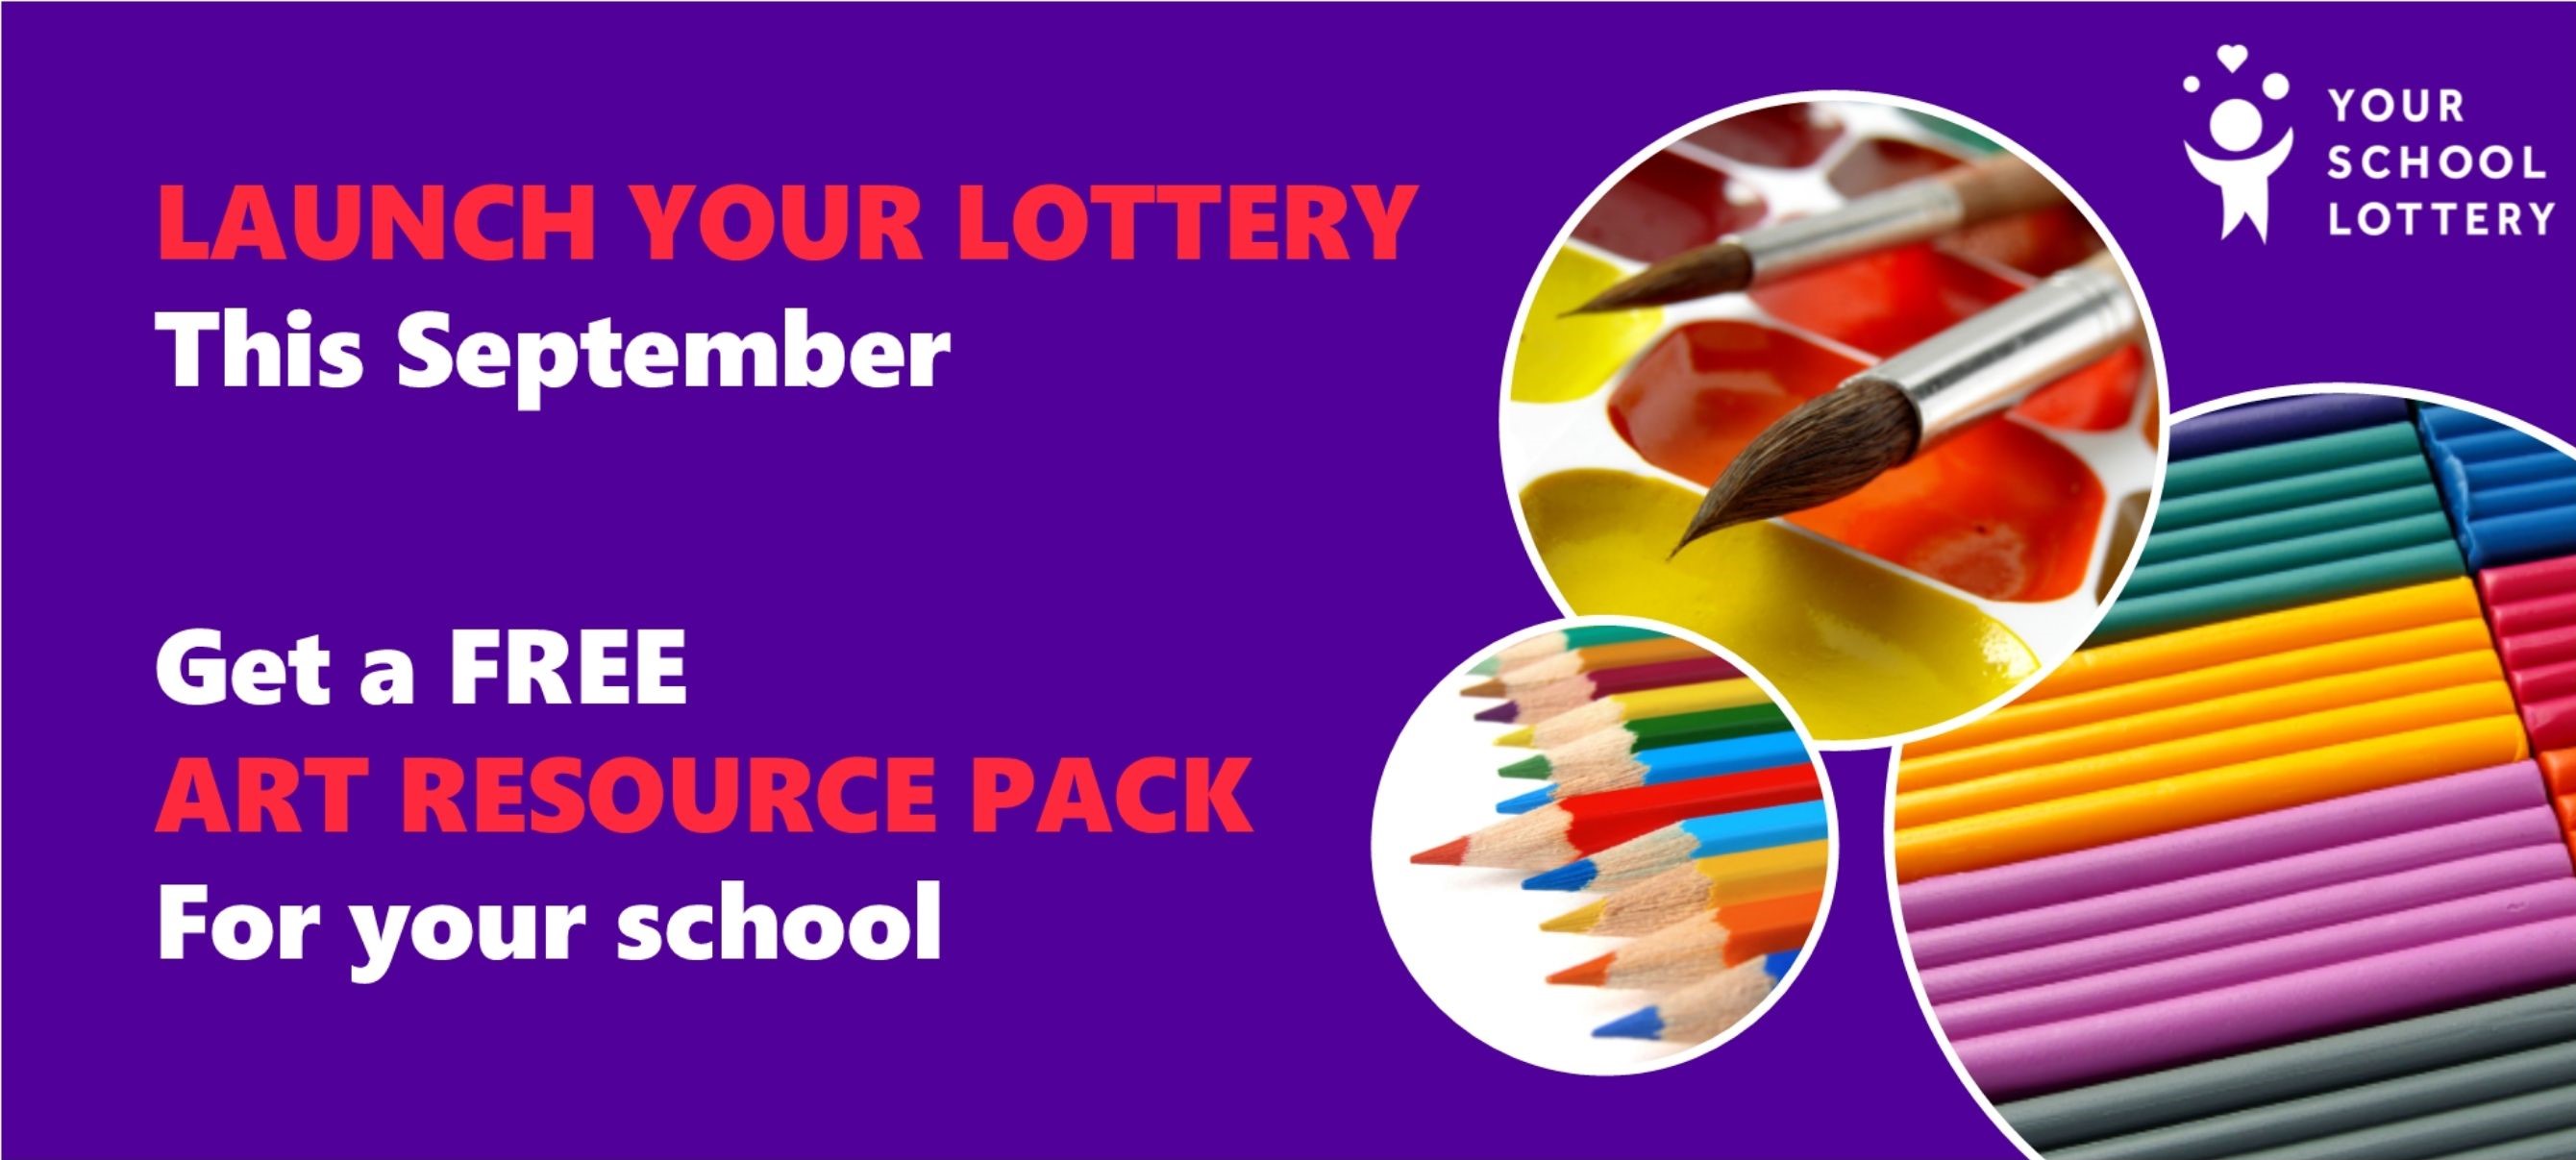 Free art resource pack when you start a school lottery